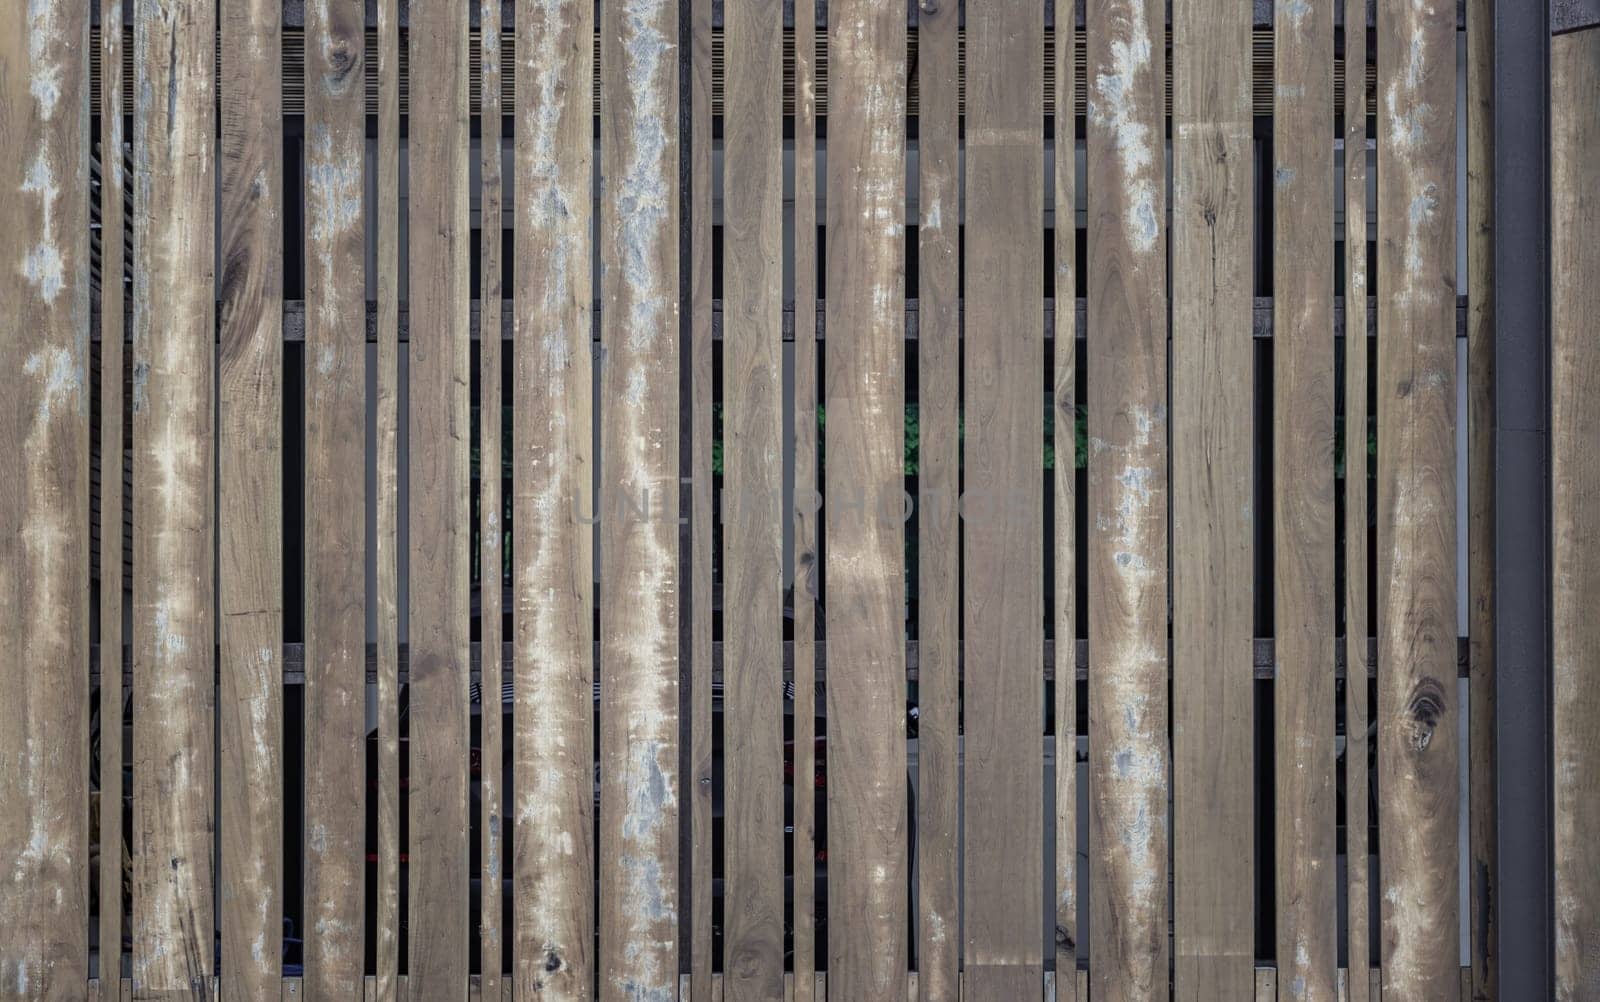 Textural background of wooden panels an old fence with a clear pattern of wood. A row evenly spaced rough brown timber planks used as a garden fence, Old natural wooden plank background texture, Space for text, Selective focus.